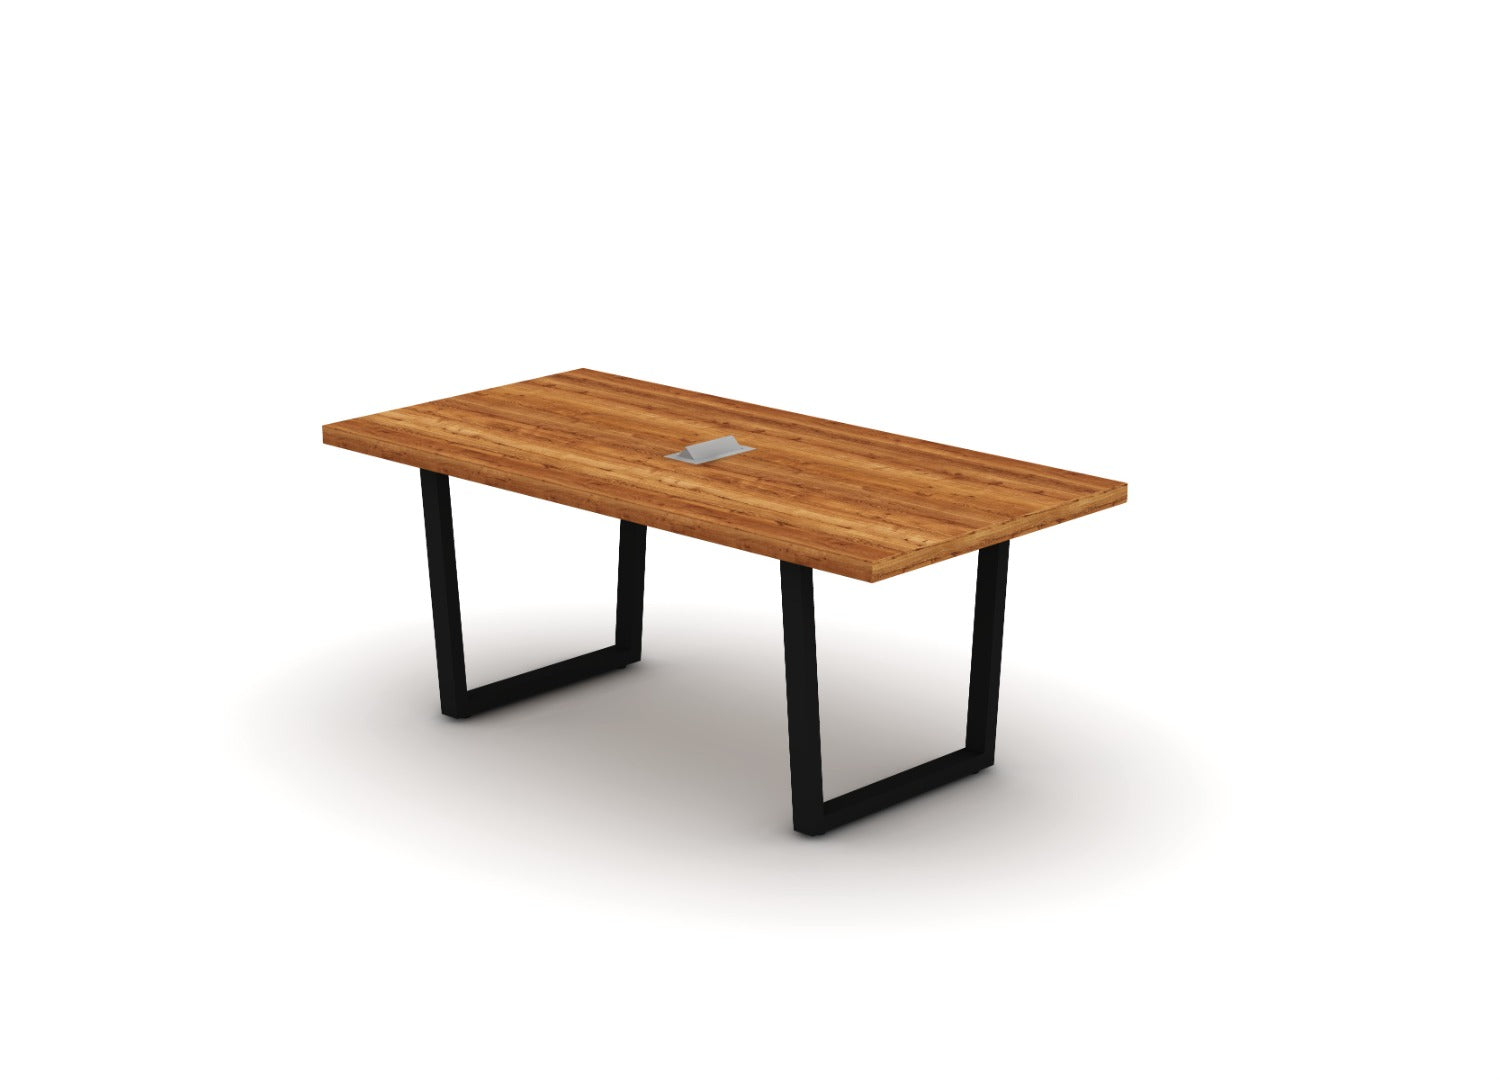 Square Edge Conference Table